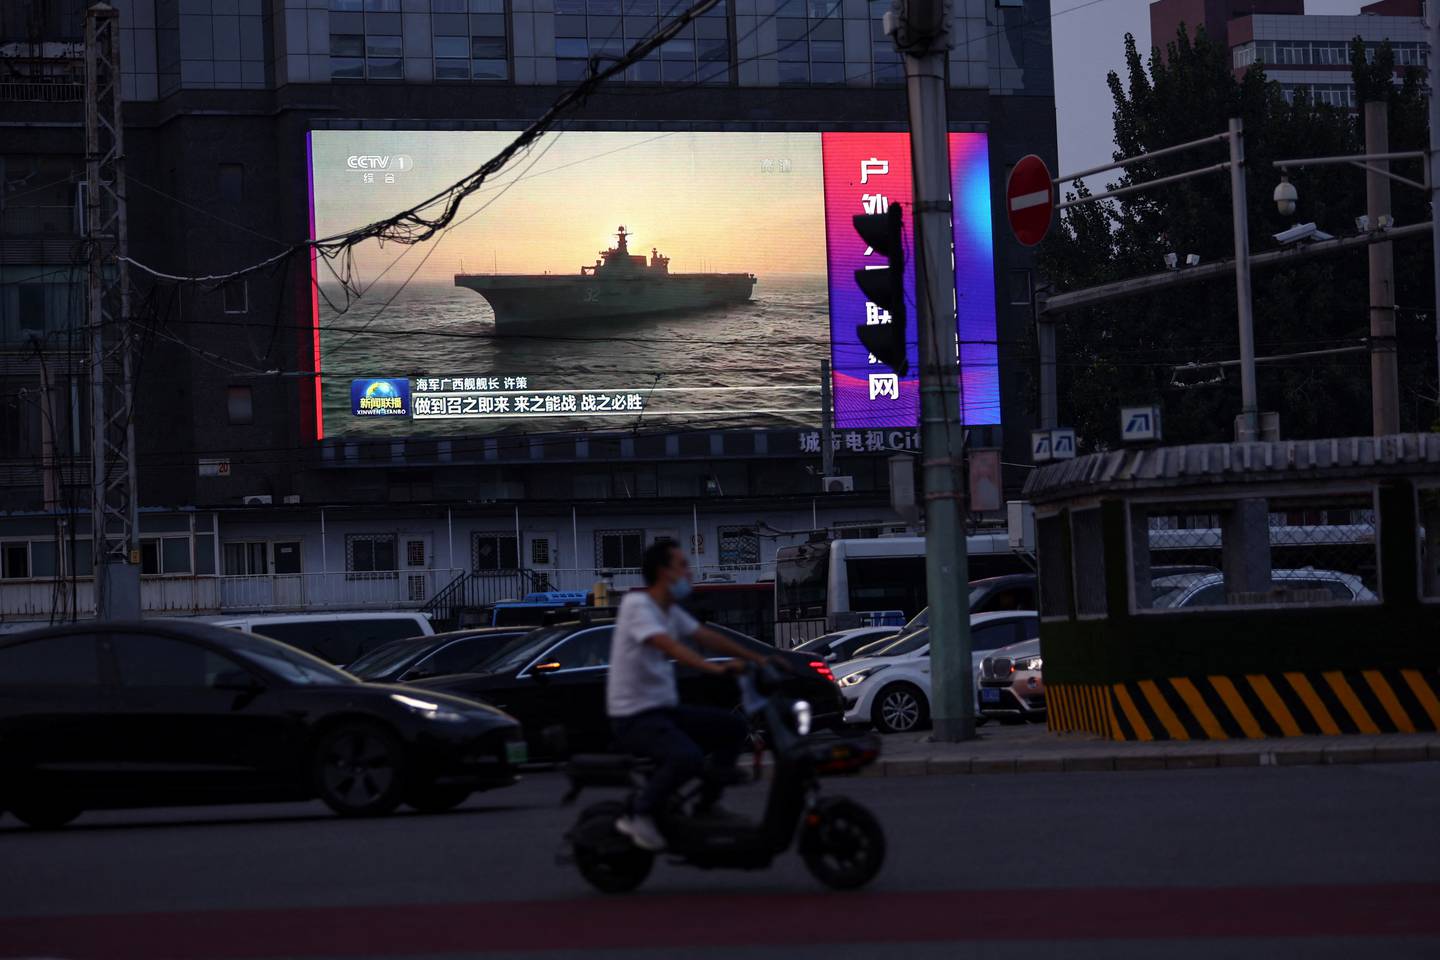 A man rides a scooter past a screen showing footage of a Chinese People's Liberation Army ship during an evening news programme in Beijing, China. Reuters